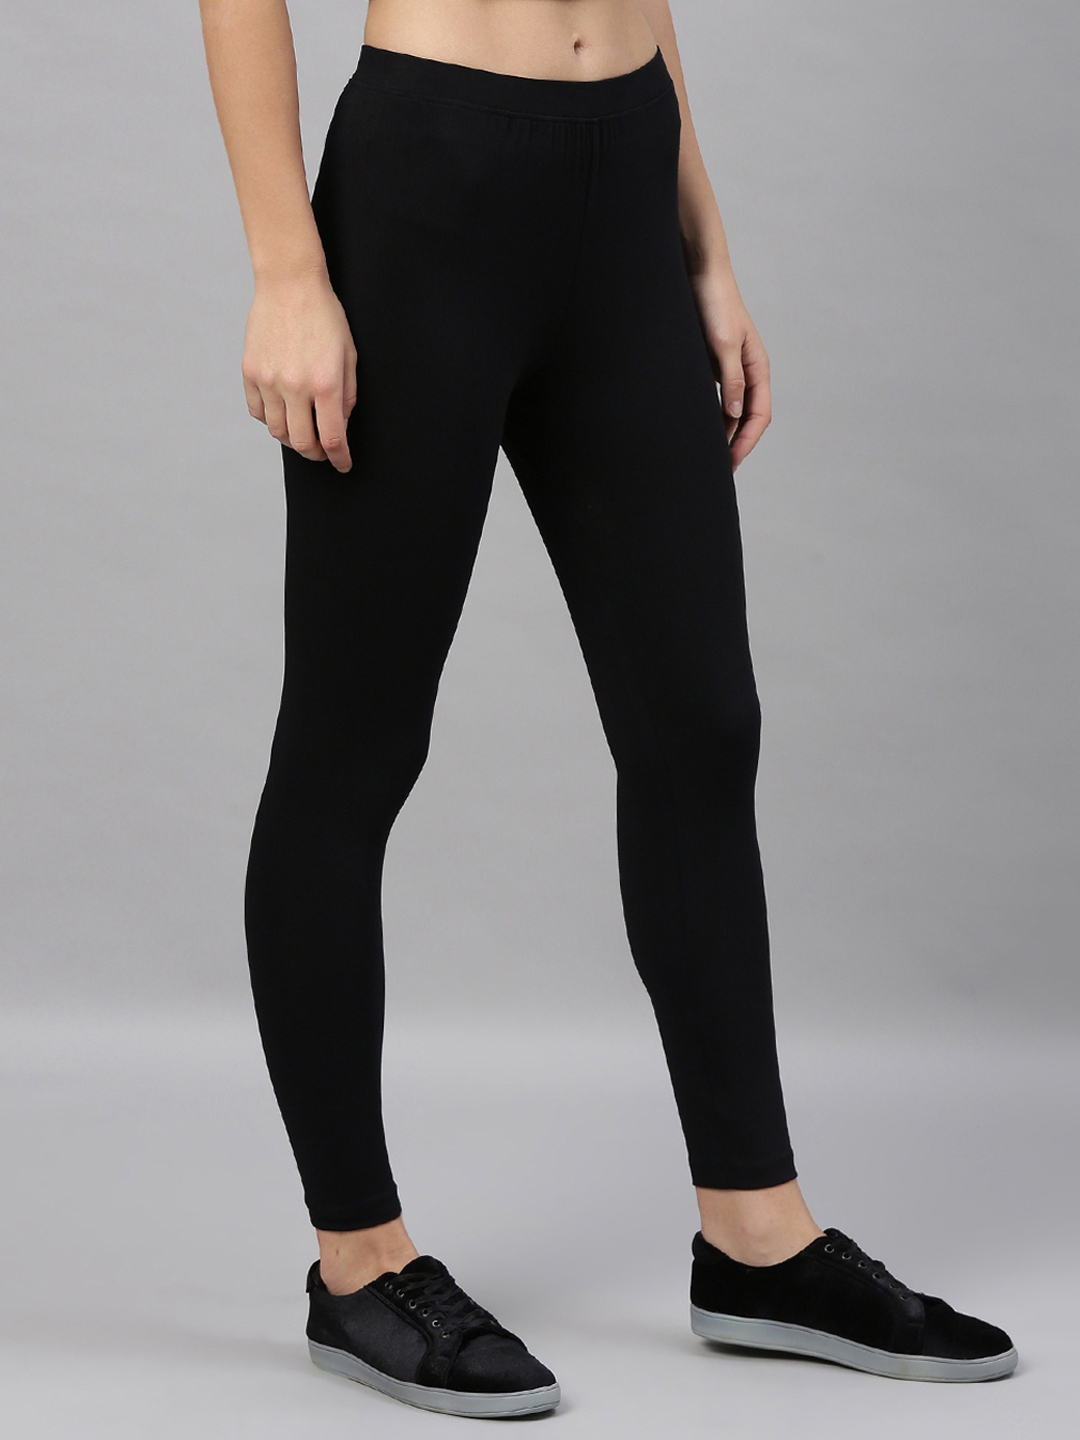 Kryptic | Kryptic Women's Cotton Stretch Solid Ankle Length Leggings 1